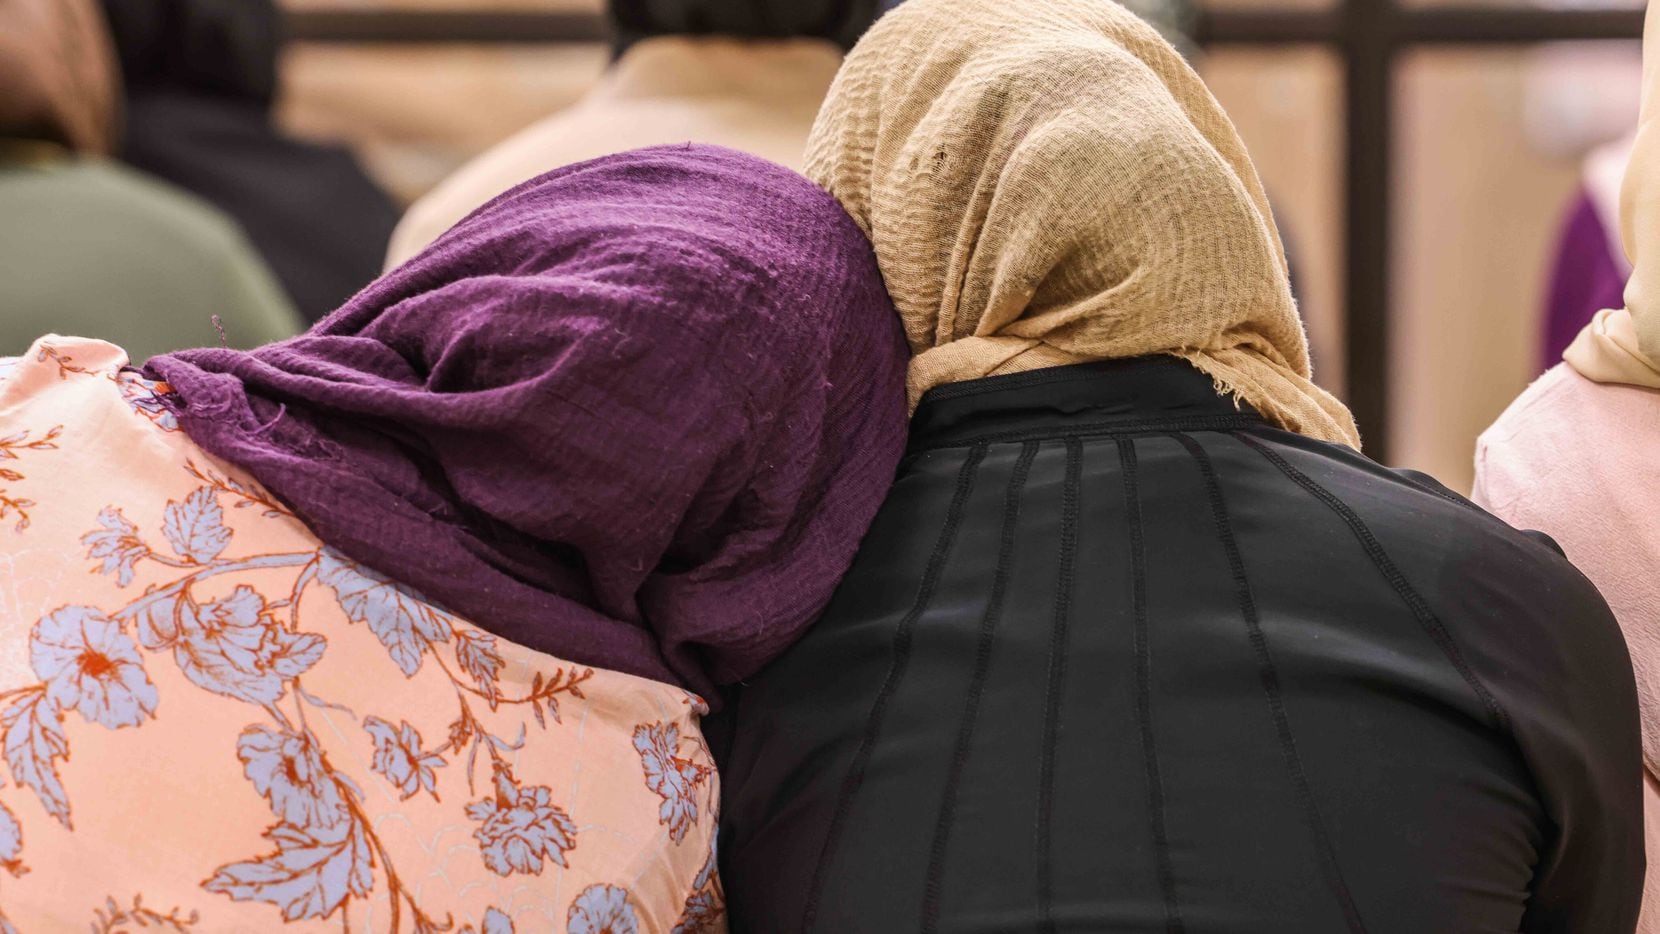 A group of Muslim women attended an afternoon prayer and lecture at the East Plano Islamic Center on Aug. 27, 2021.